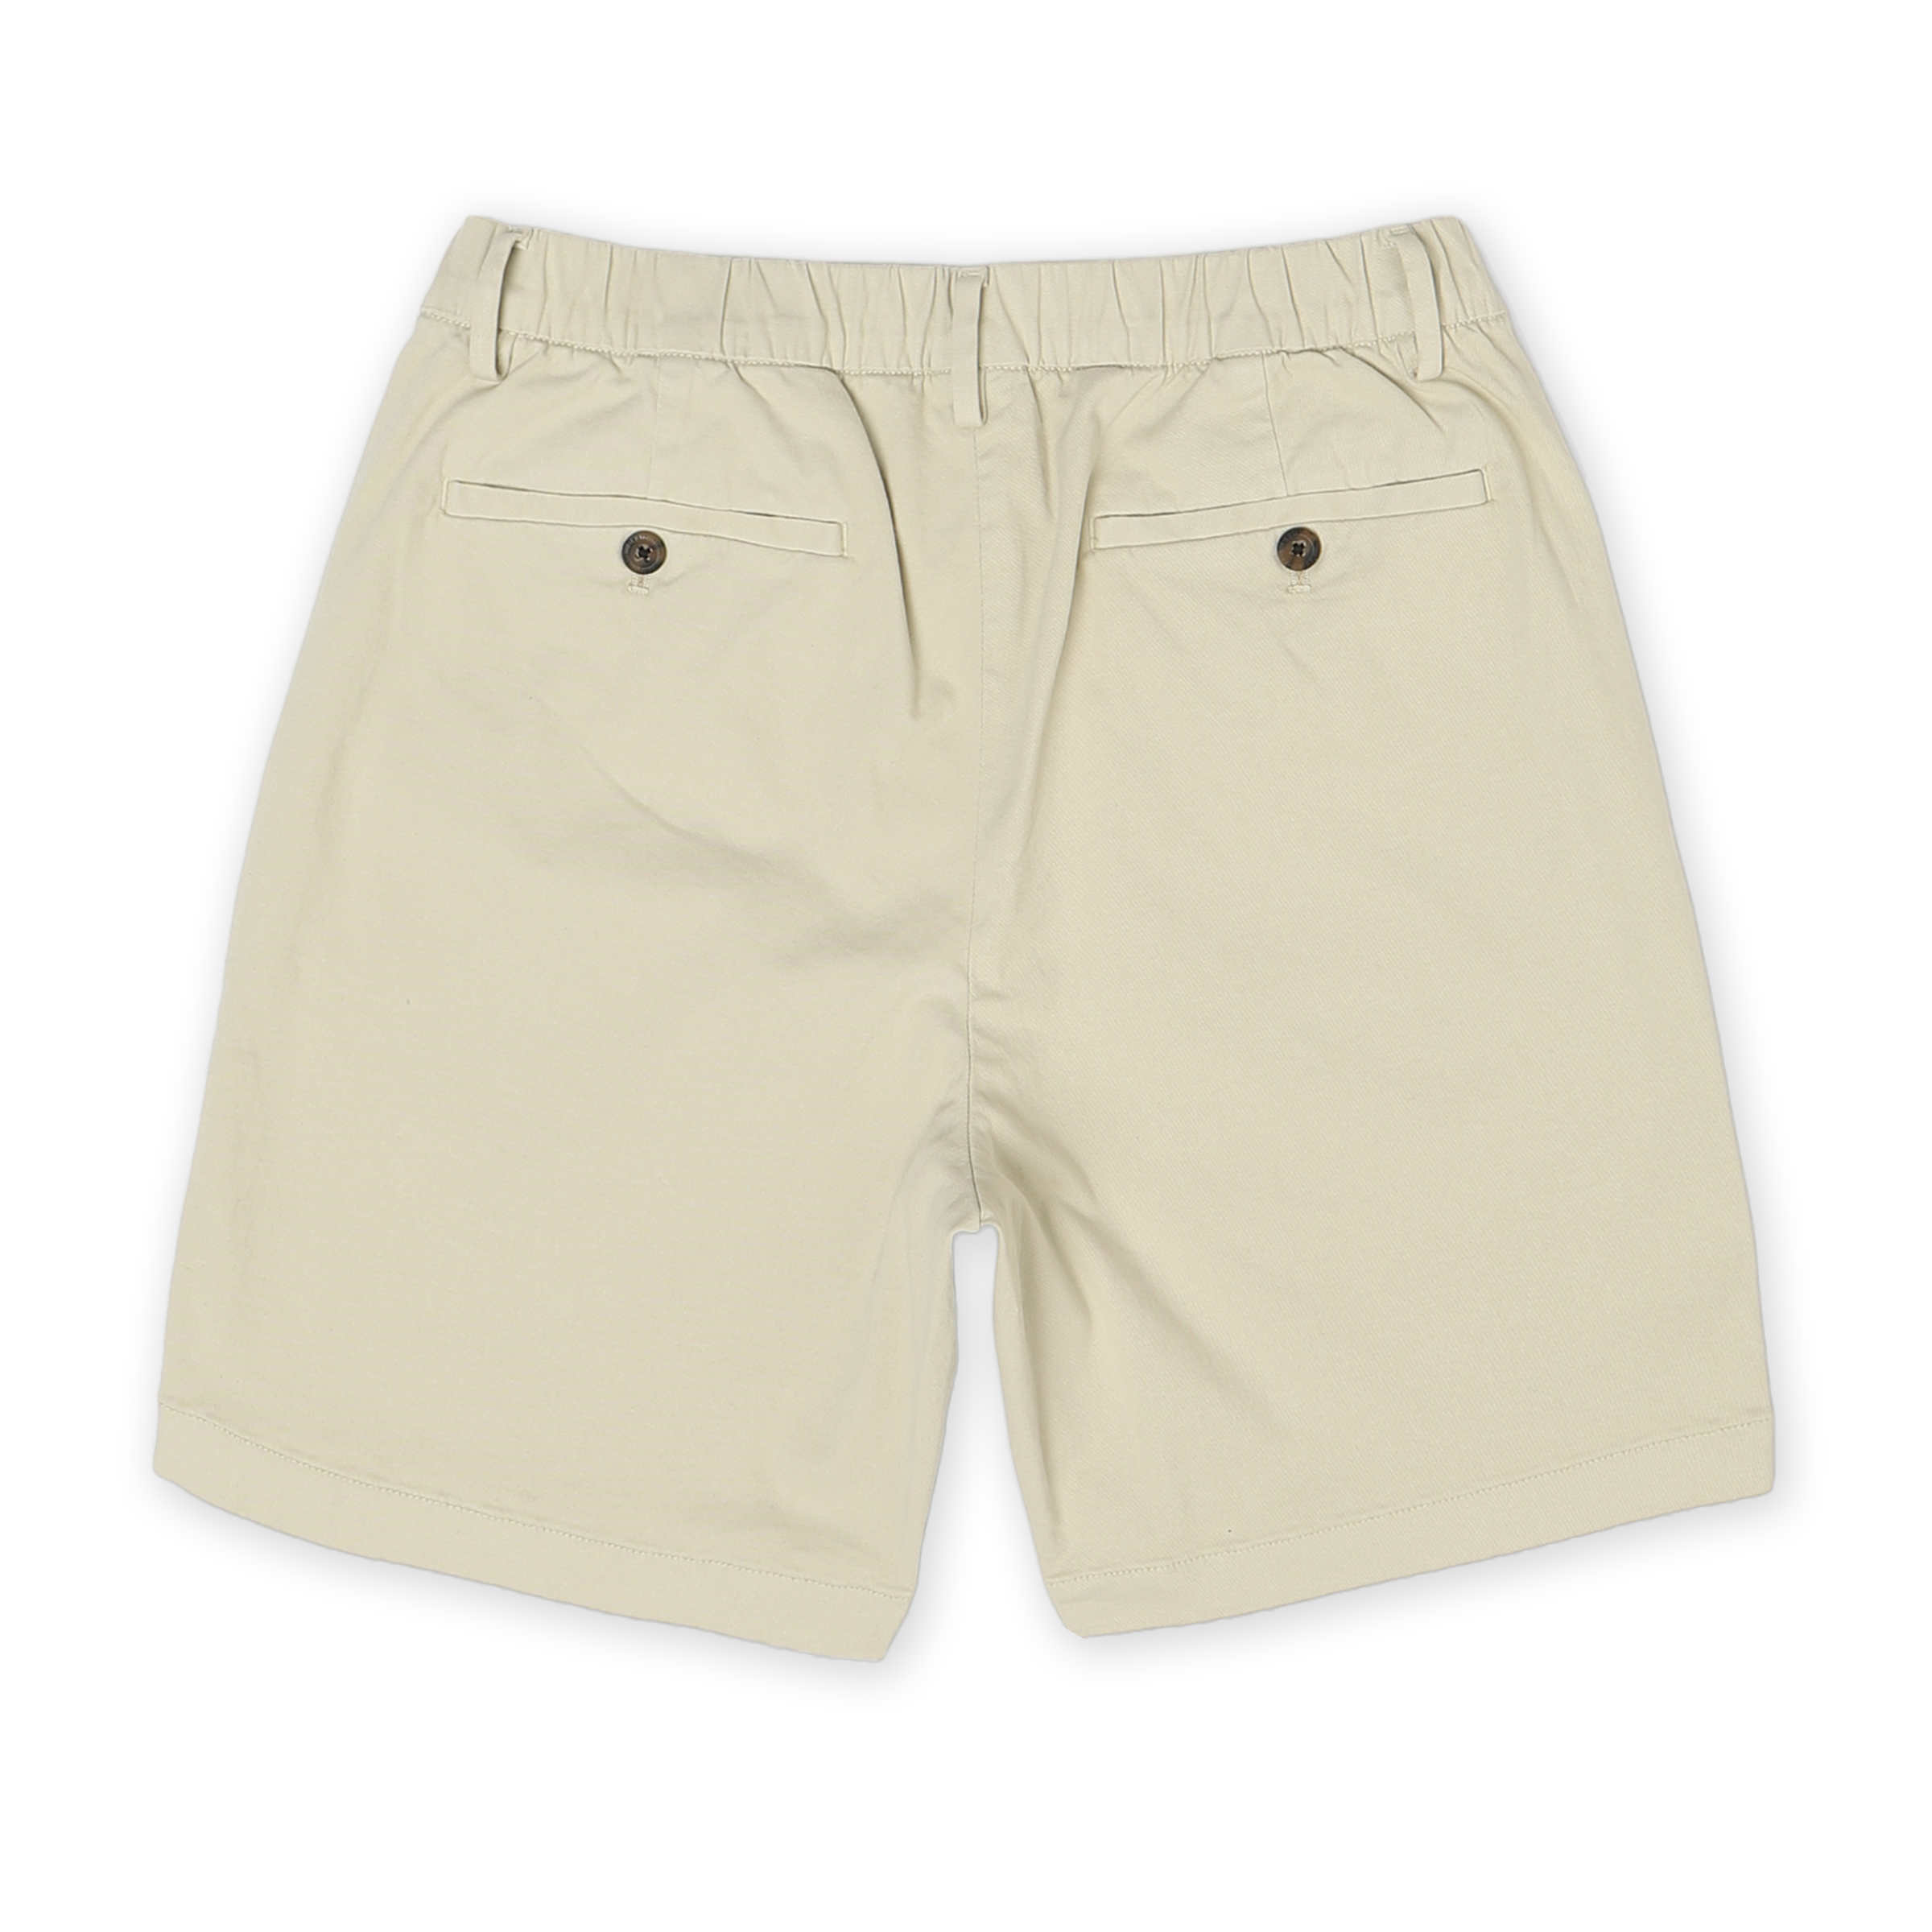 Stretch Chino Short 5.5" in Stone back with elastic waistband, belt loops, and two buttoned welt pockets